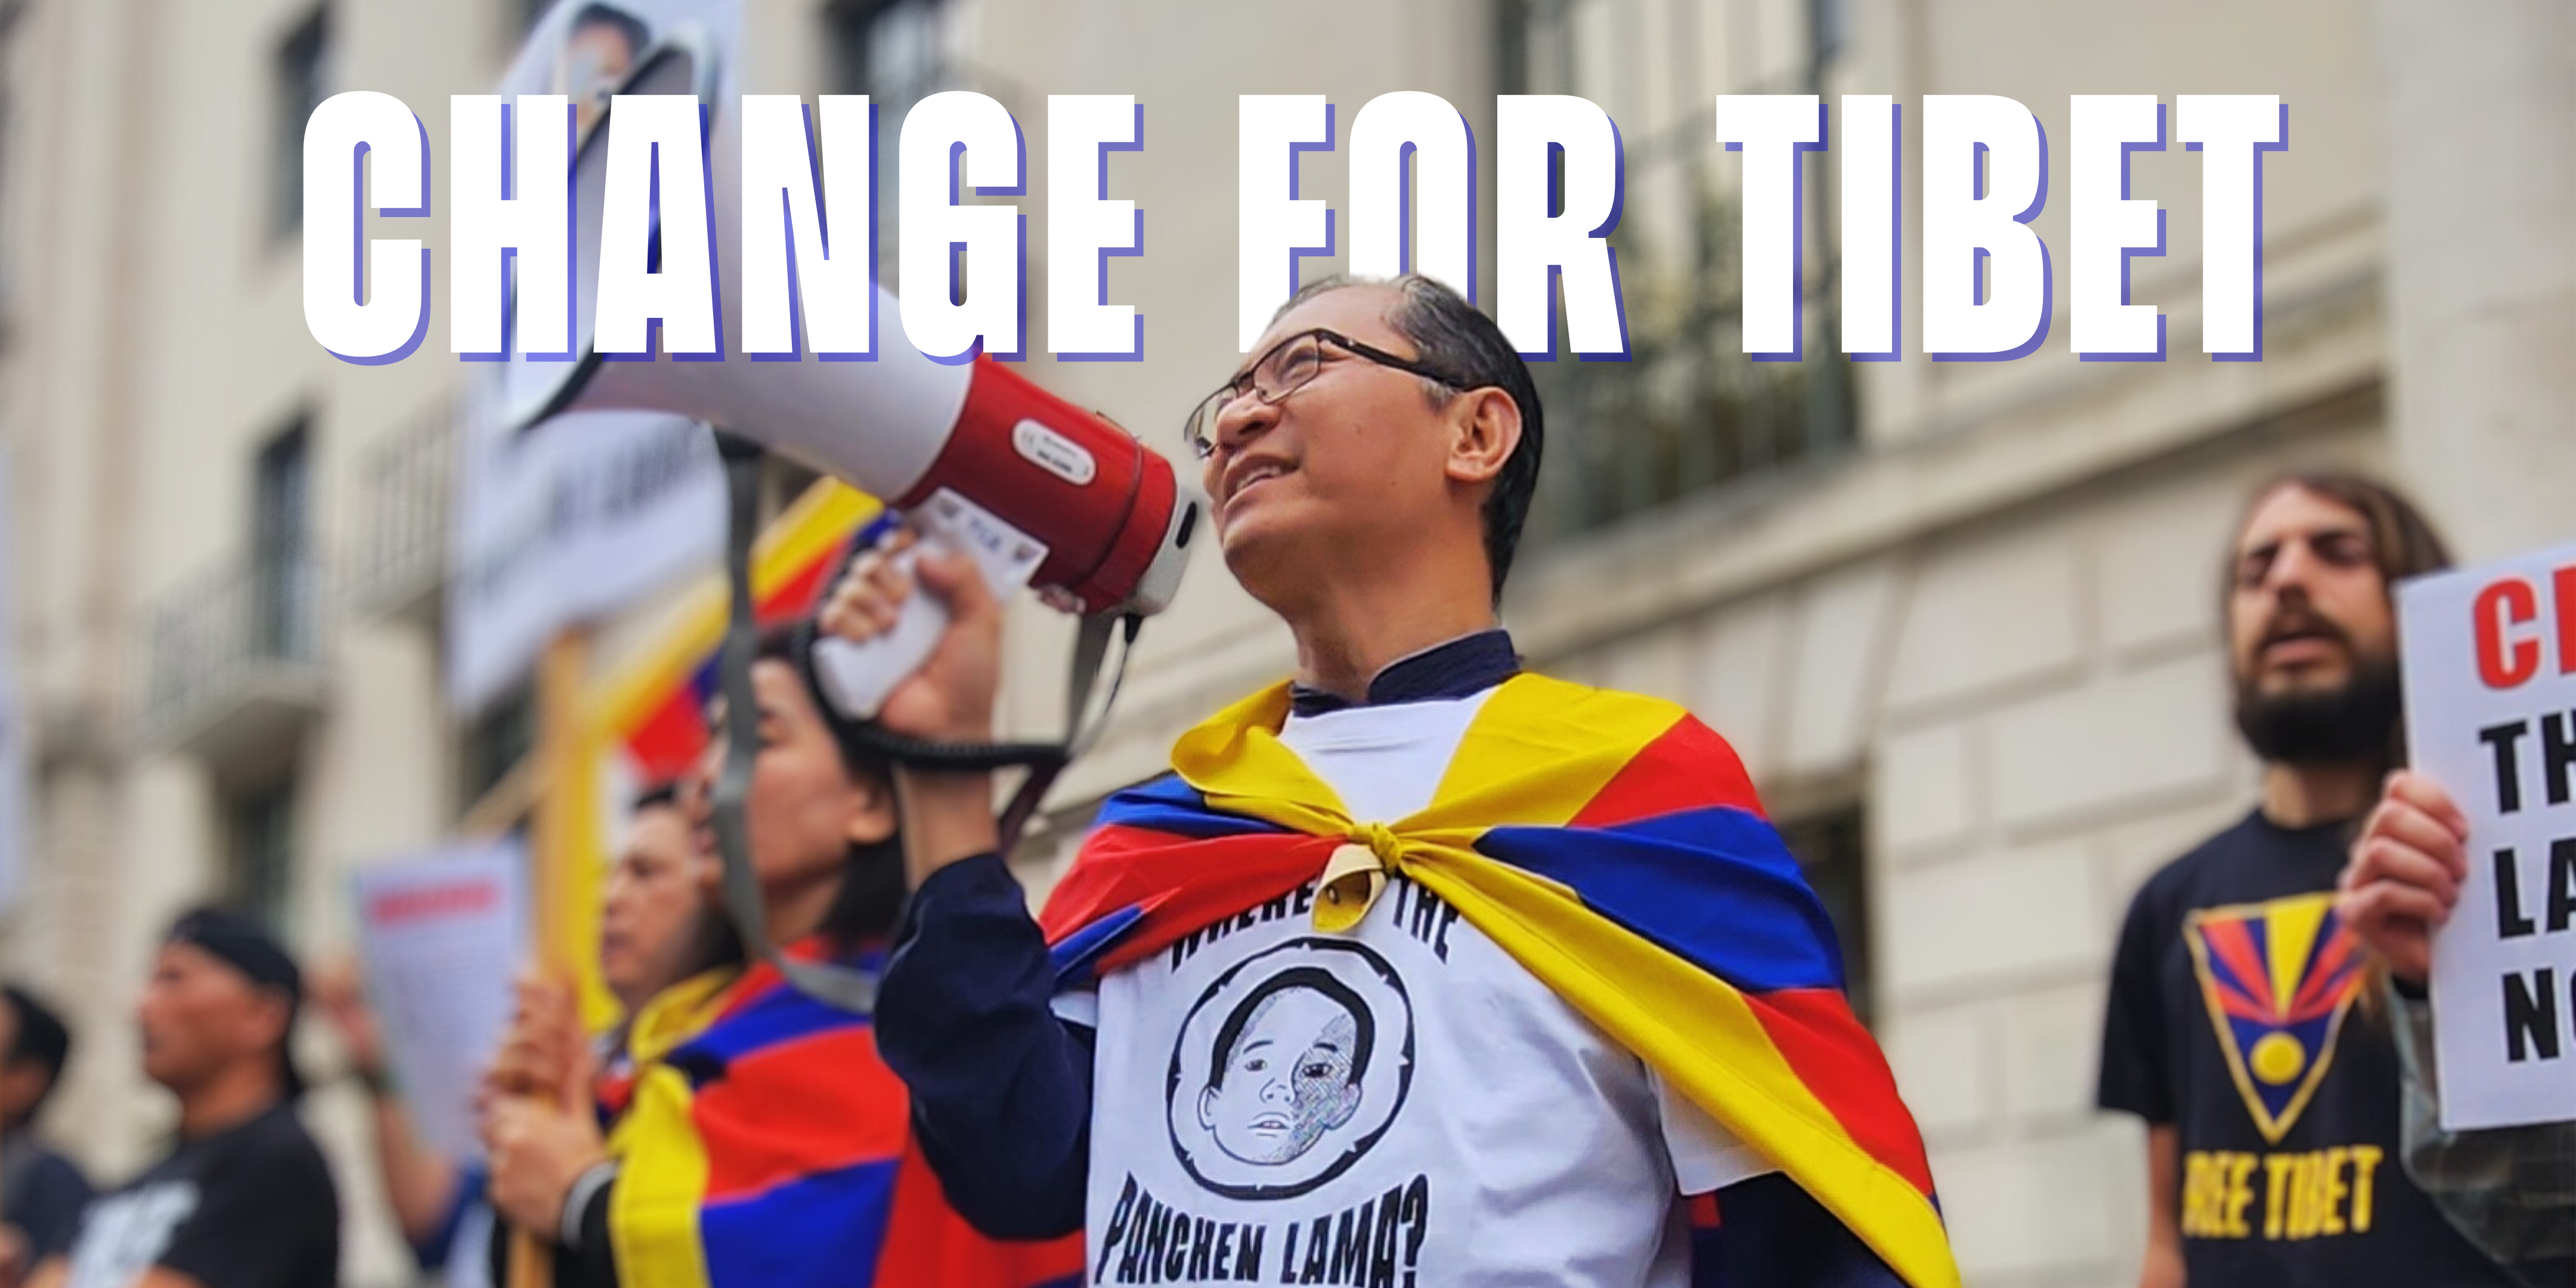 Tenzin Kunga from Free Tibet protesting outside the Chinese embassy in London, holding a megaphone and wearing a t-shirt that says "Where is the Panchen Lama?"